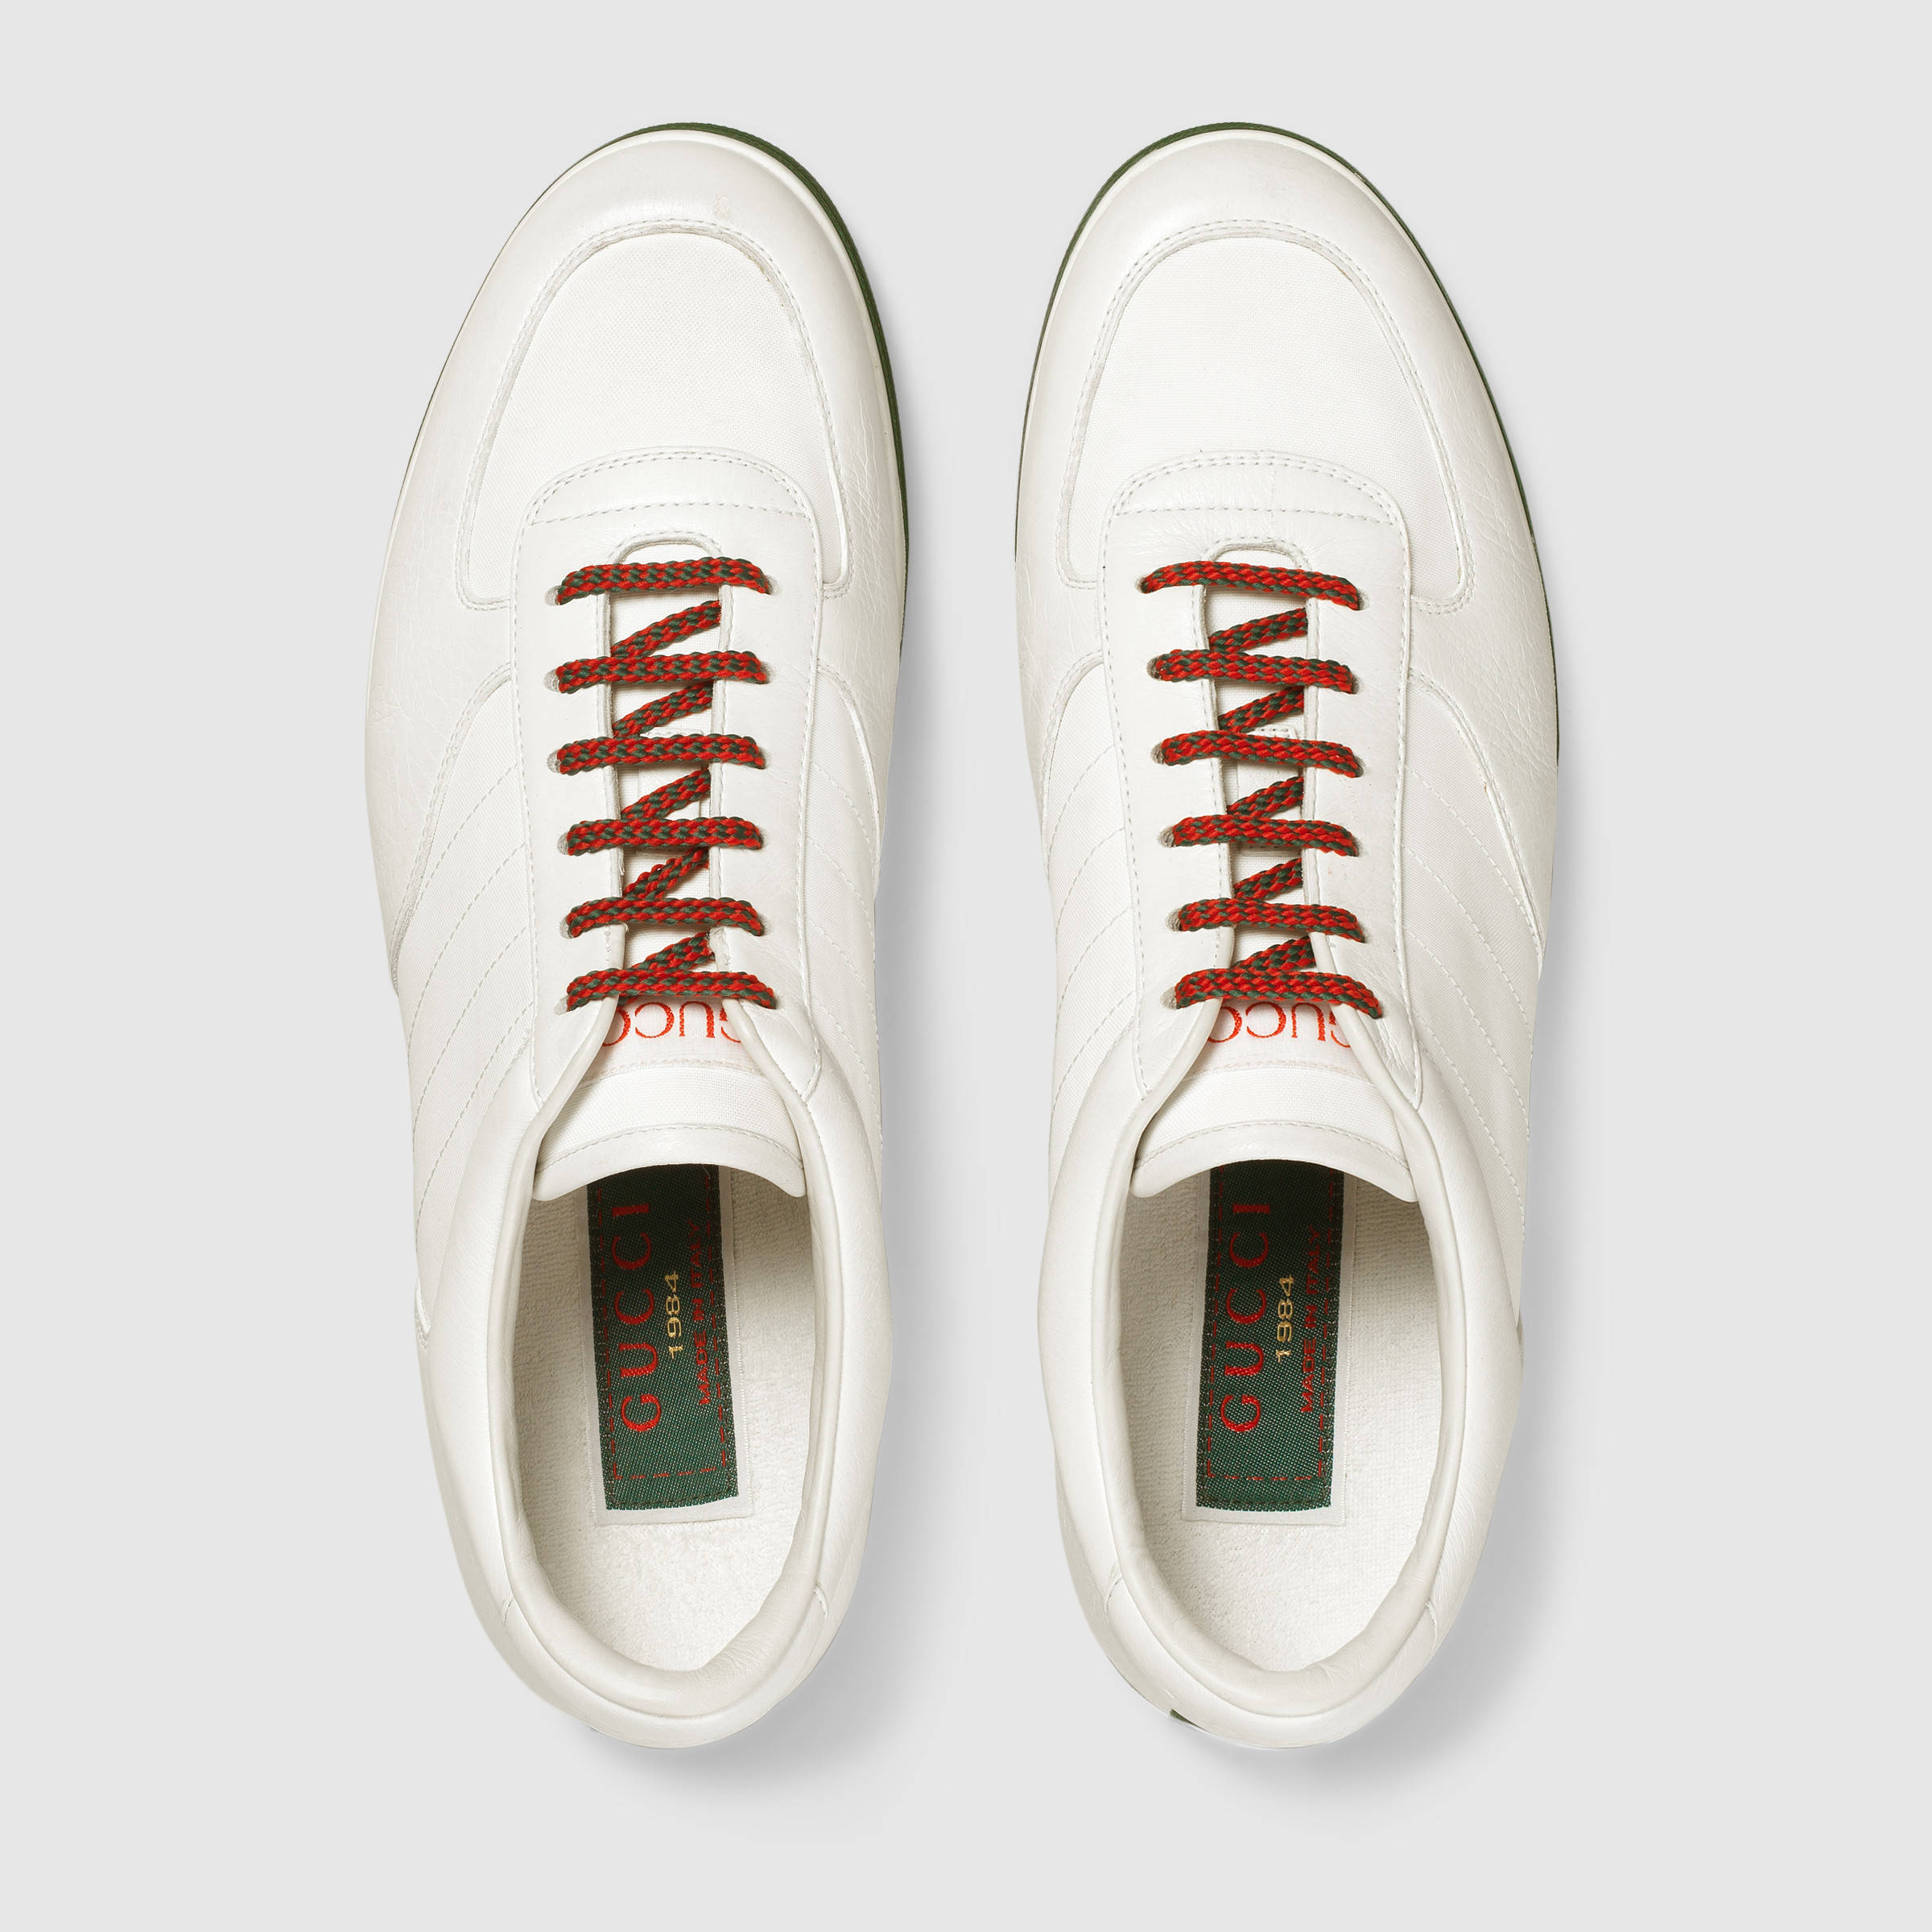 1984 gucci tennis shoes for sale